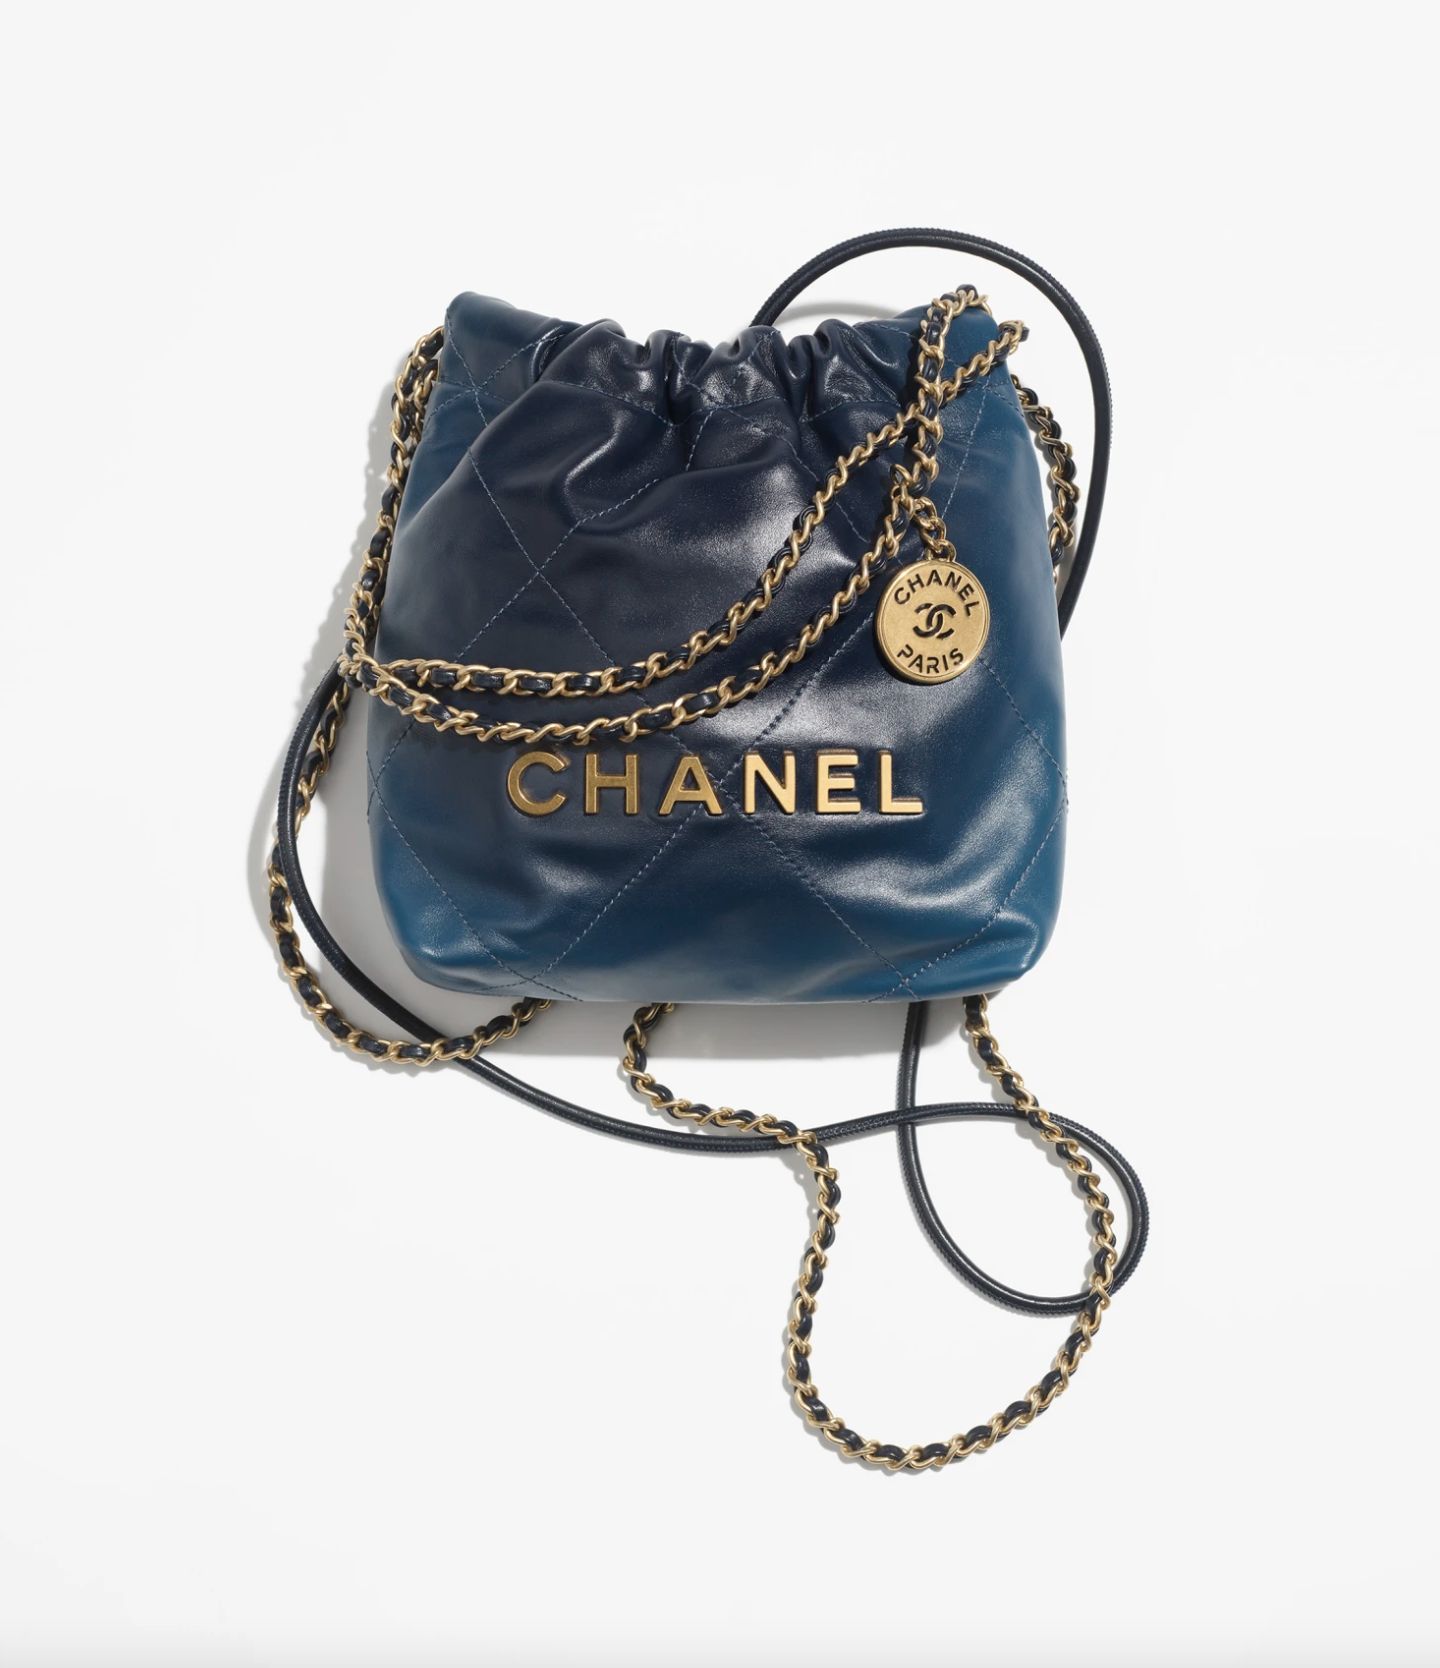 6 Chanel Flap Bag Looks For Less